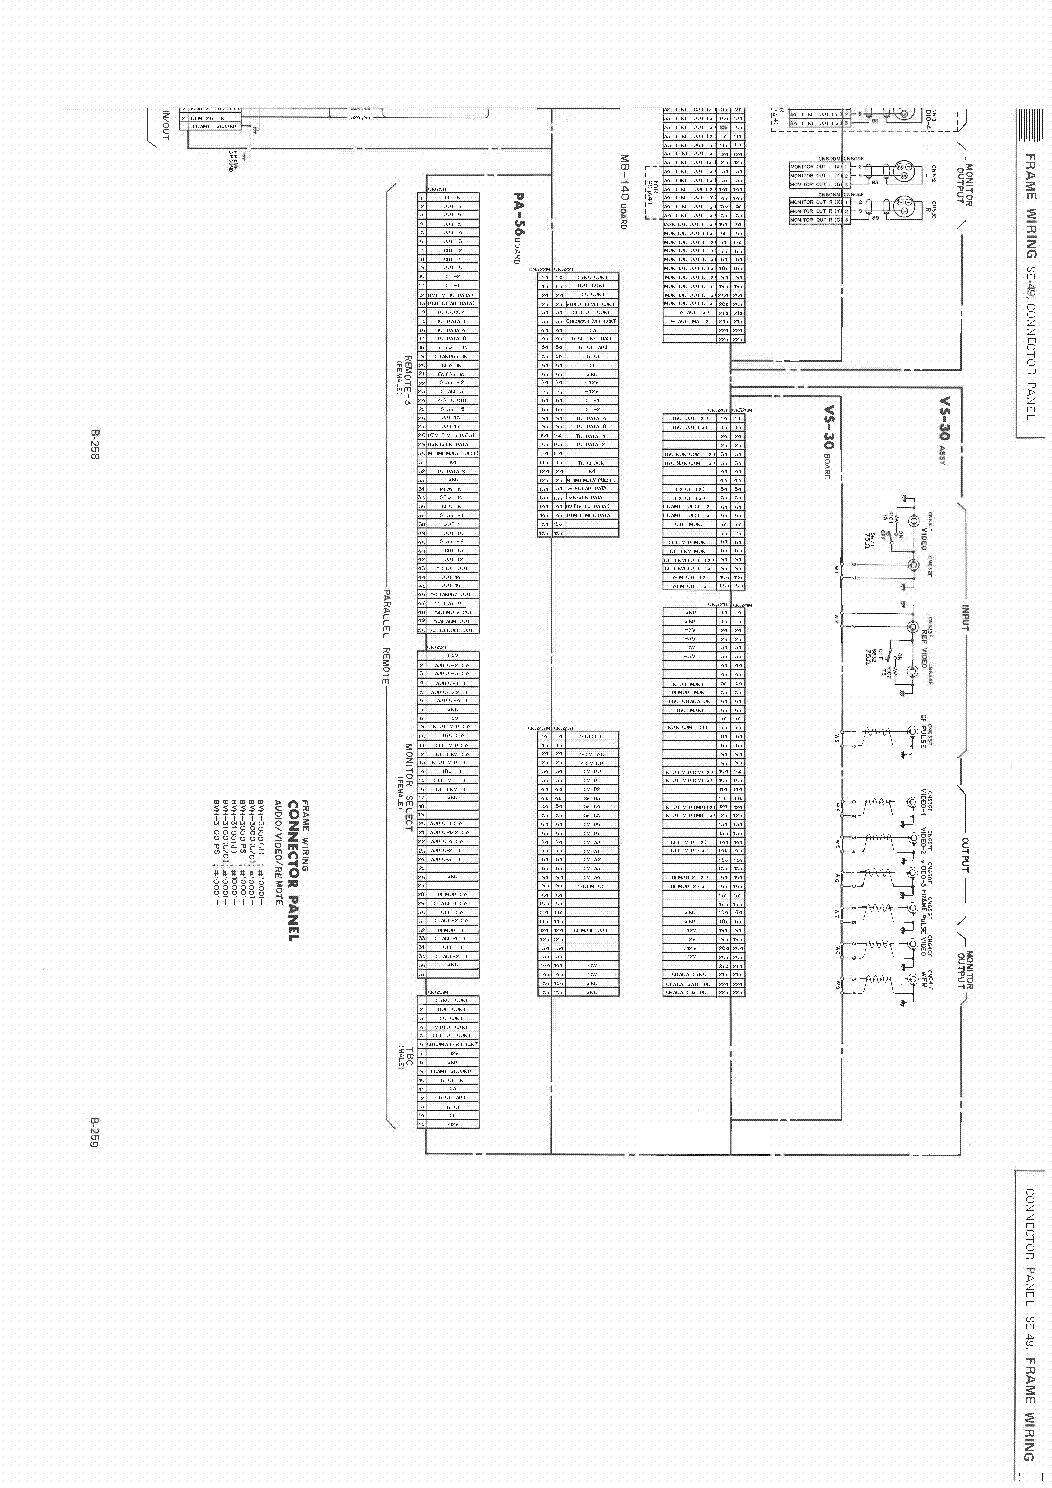 SONY BVH-3000PS BVH-3100PS SCHEMATIC DEAGRAMM AND BOARD LAYOUT TRANSPORT 2 service manual (2nd page)